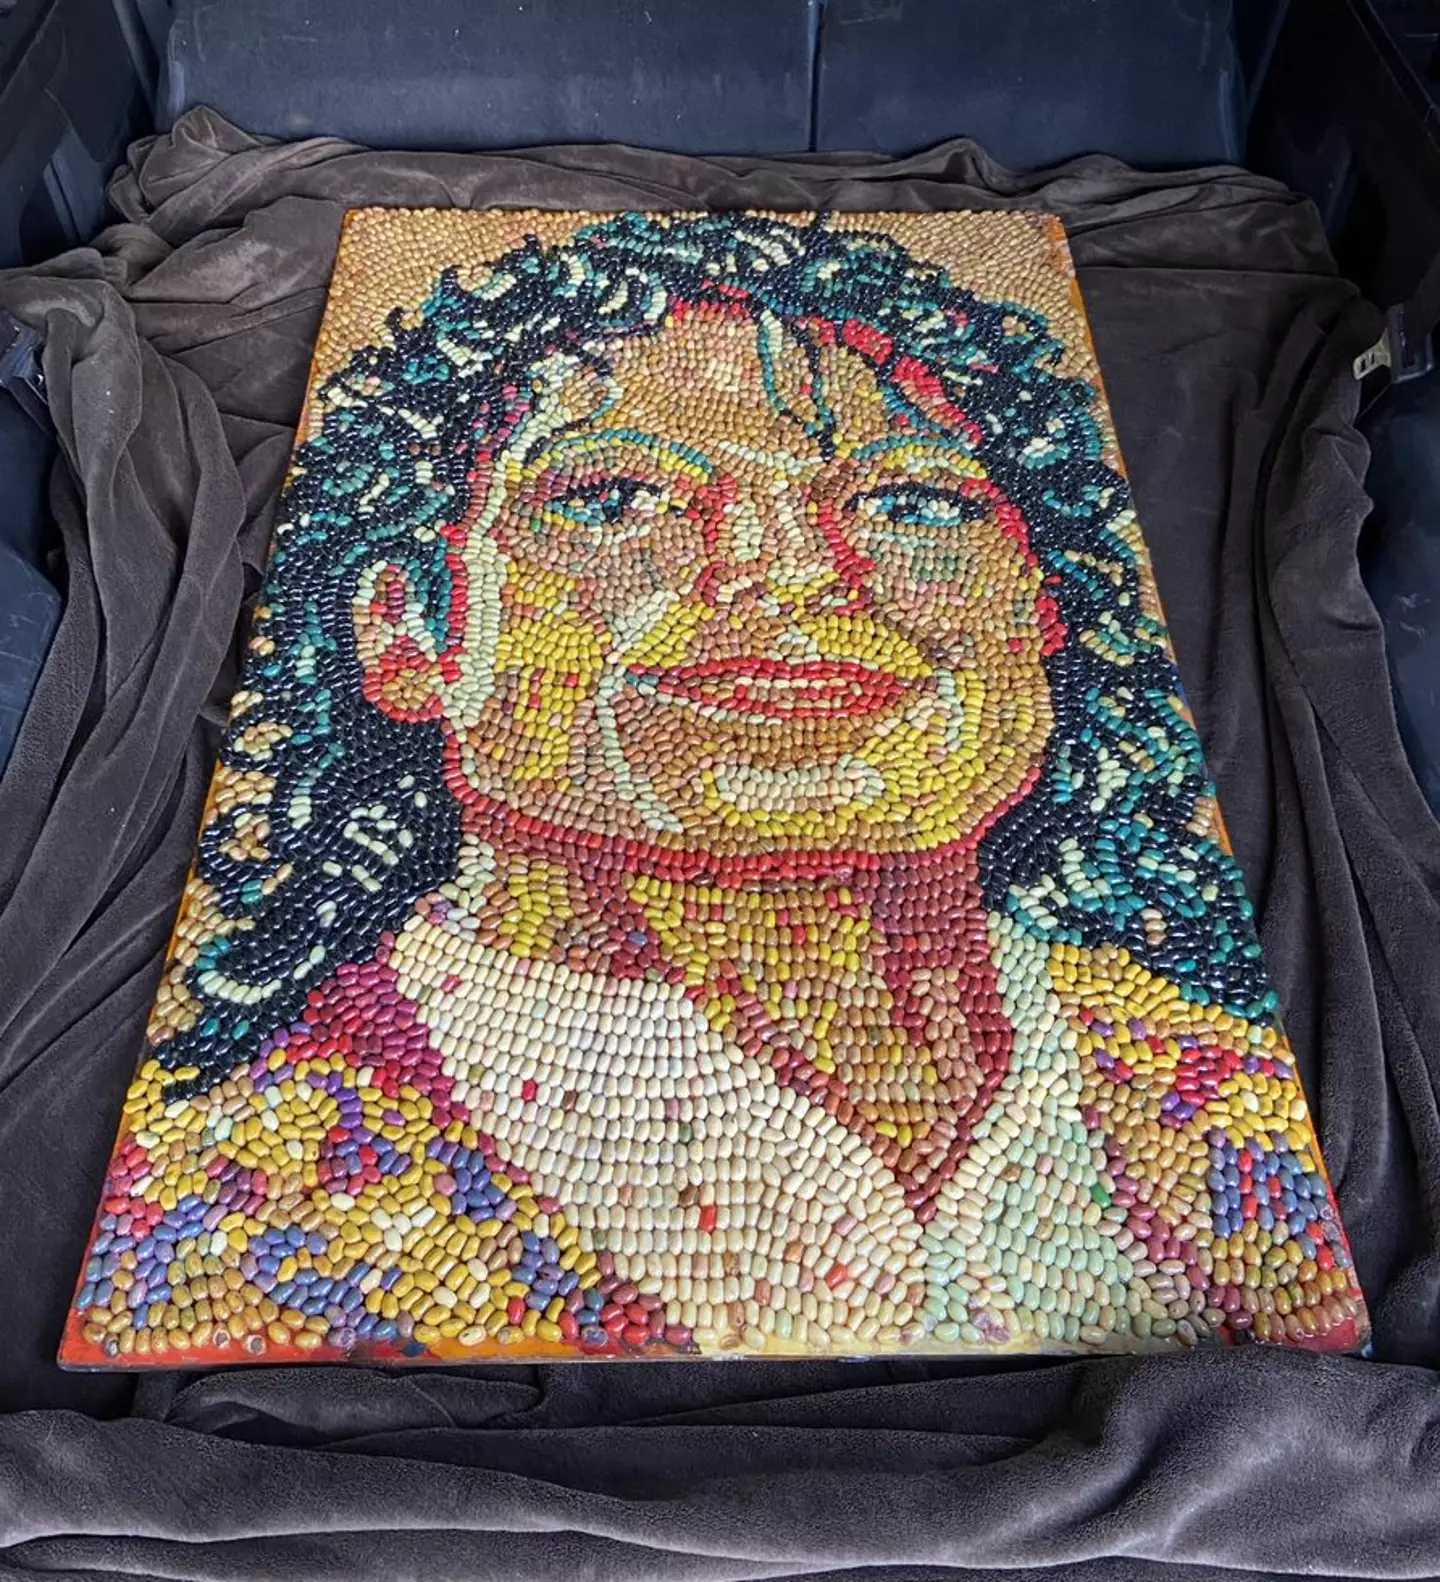 The entire portrait was made of jellybeans.